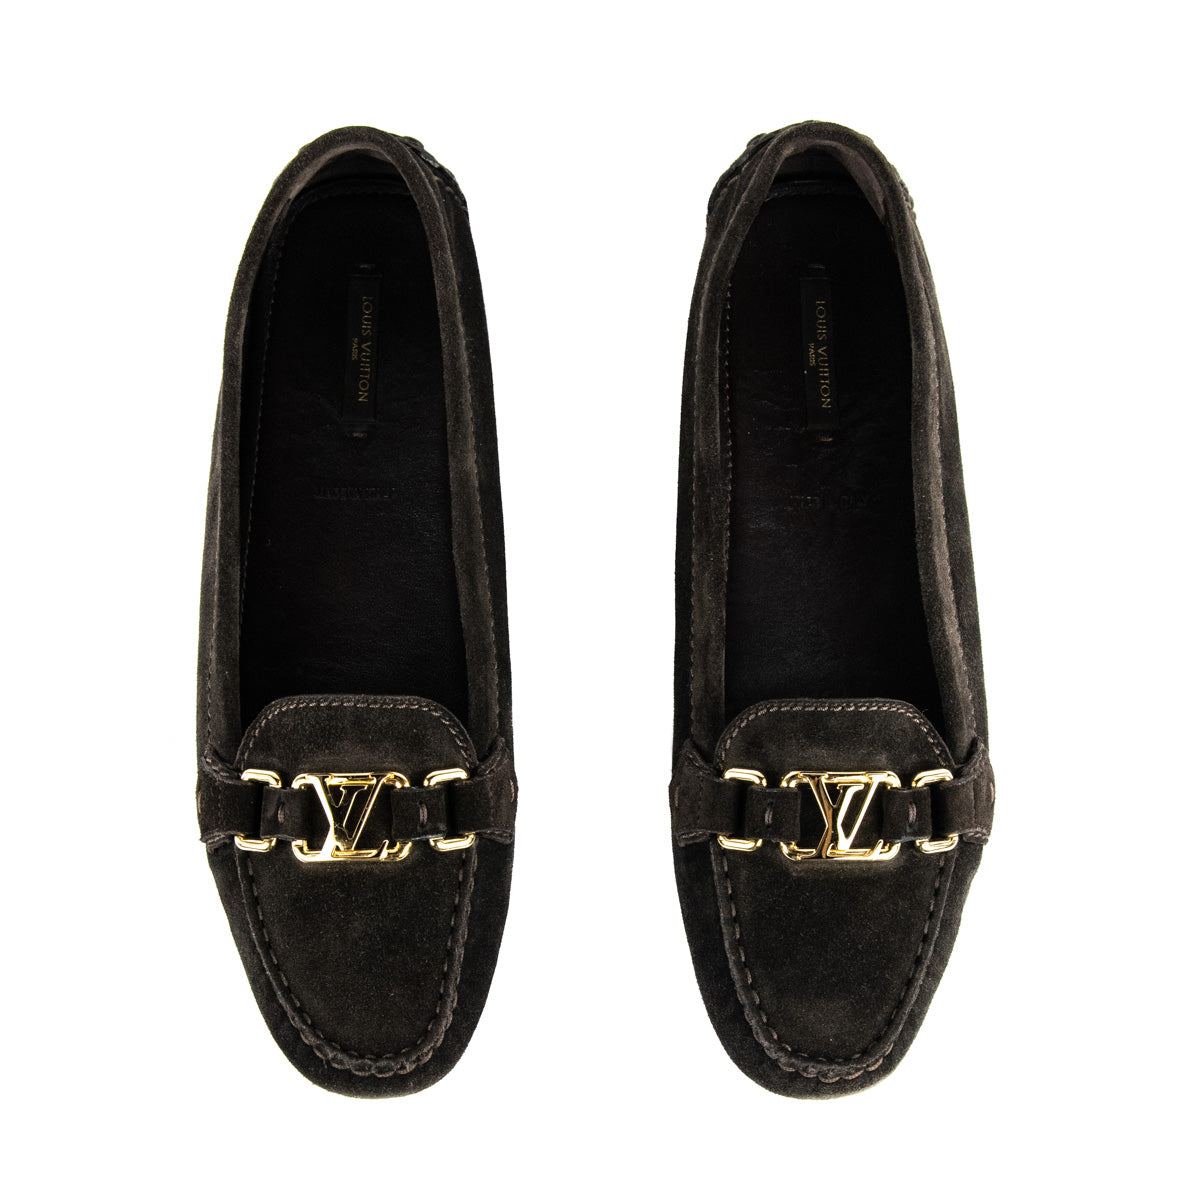 Authentic Louis Vuitton LV Logo Rallye Black Suede Loafers Size 39 W/box  & Cover